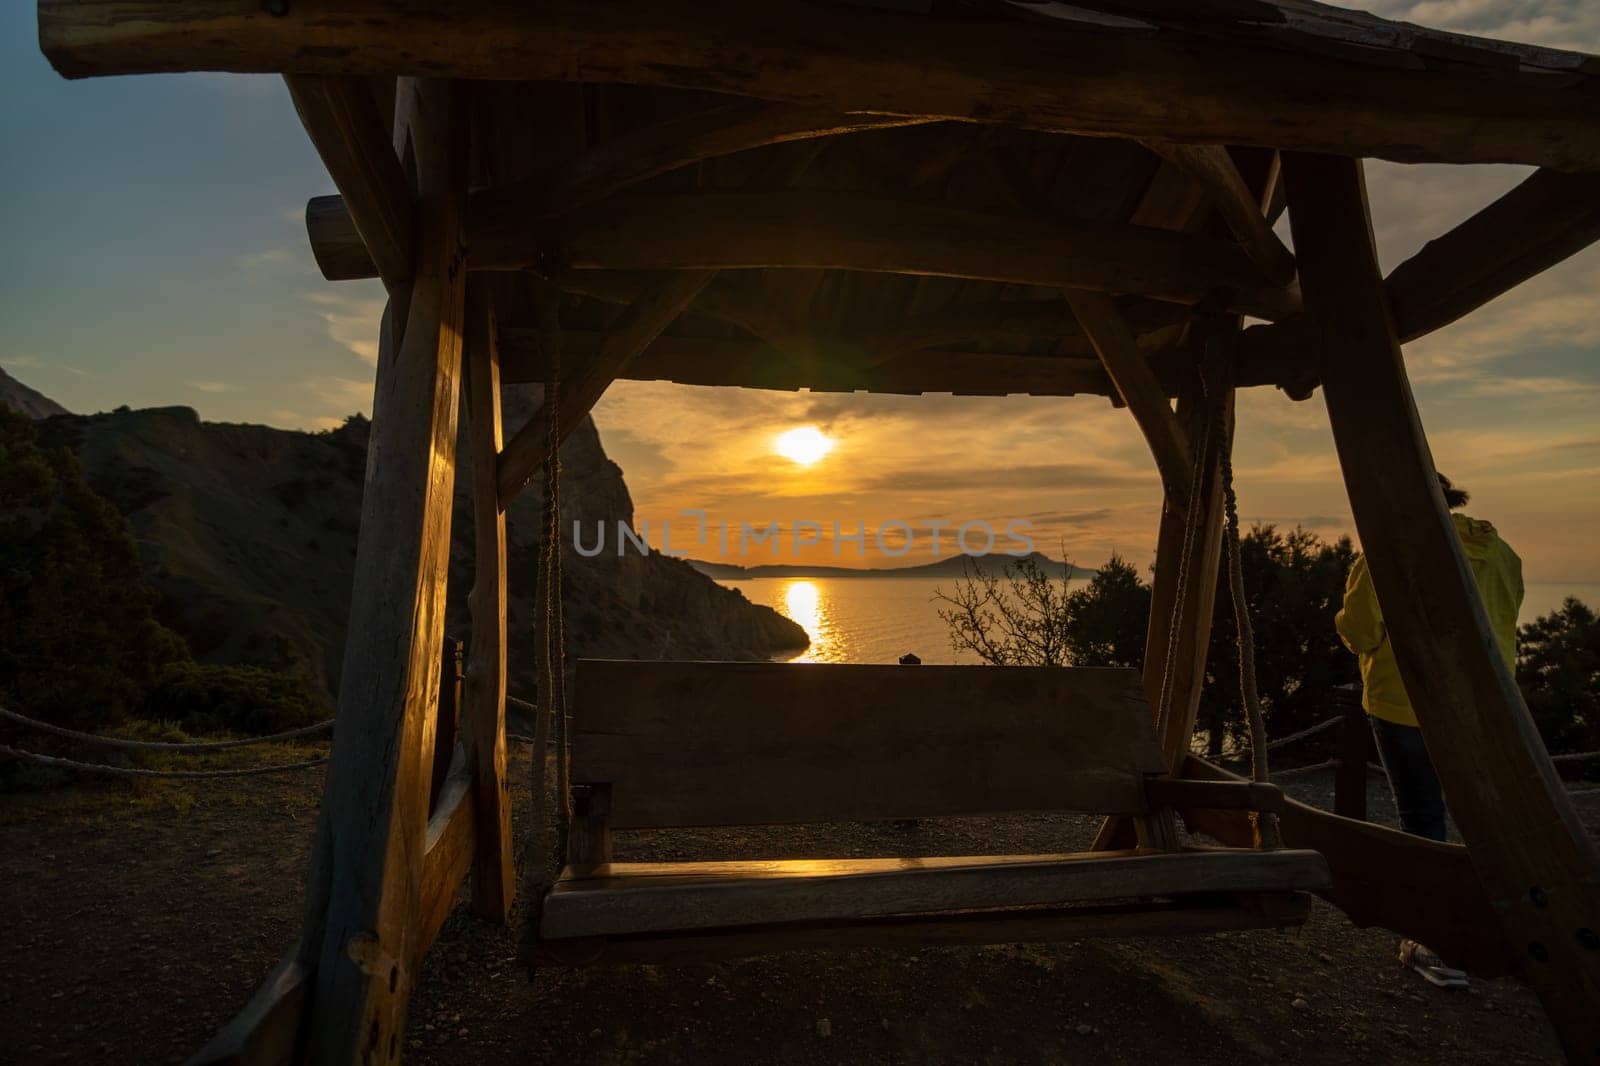 A wooden swing is suspended over a rocky shoreline. The sun is setting, casting a warm glow over the scene. by Matiunina